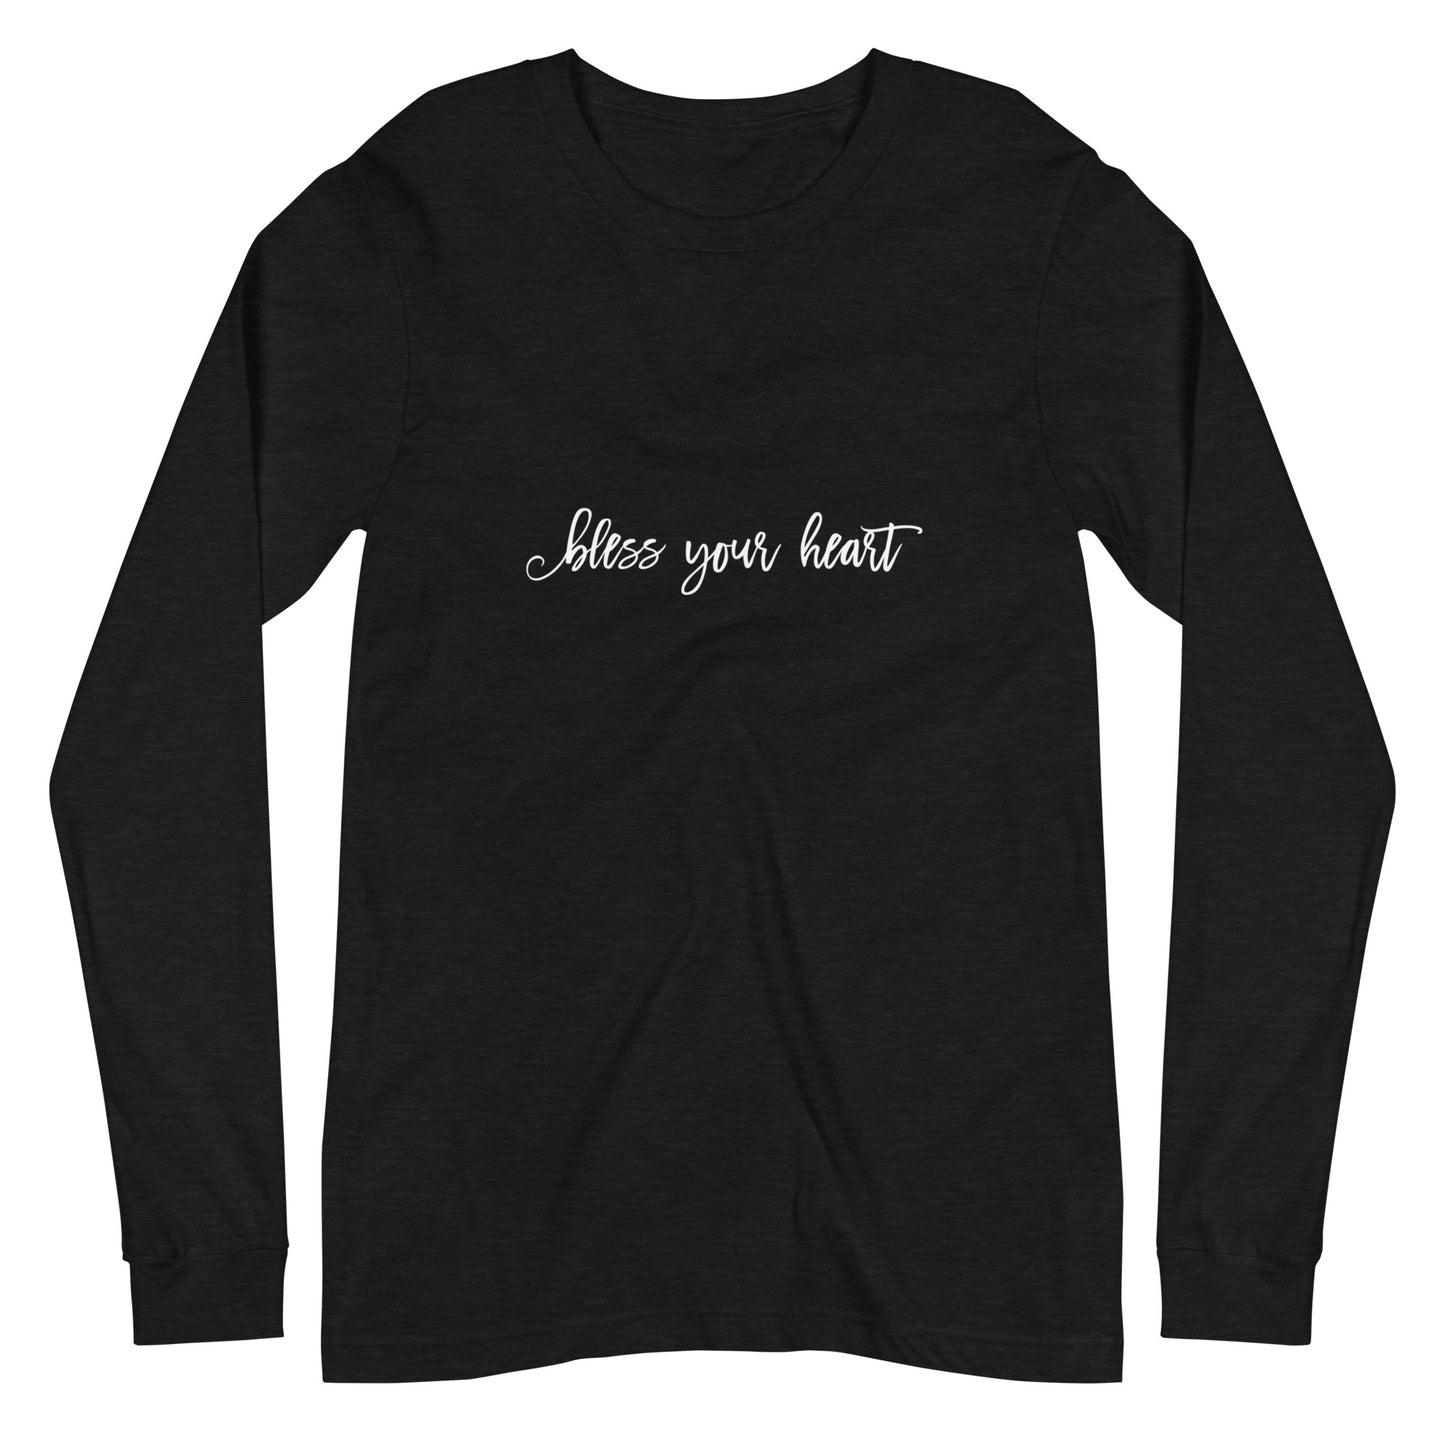 Black Heather long-sleeve t-shirt with white graphic in an excessively twee font: "bless your heart"